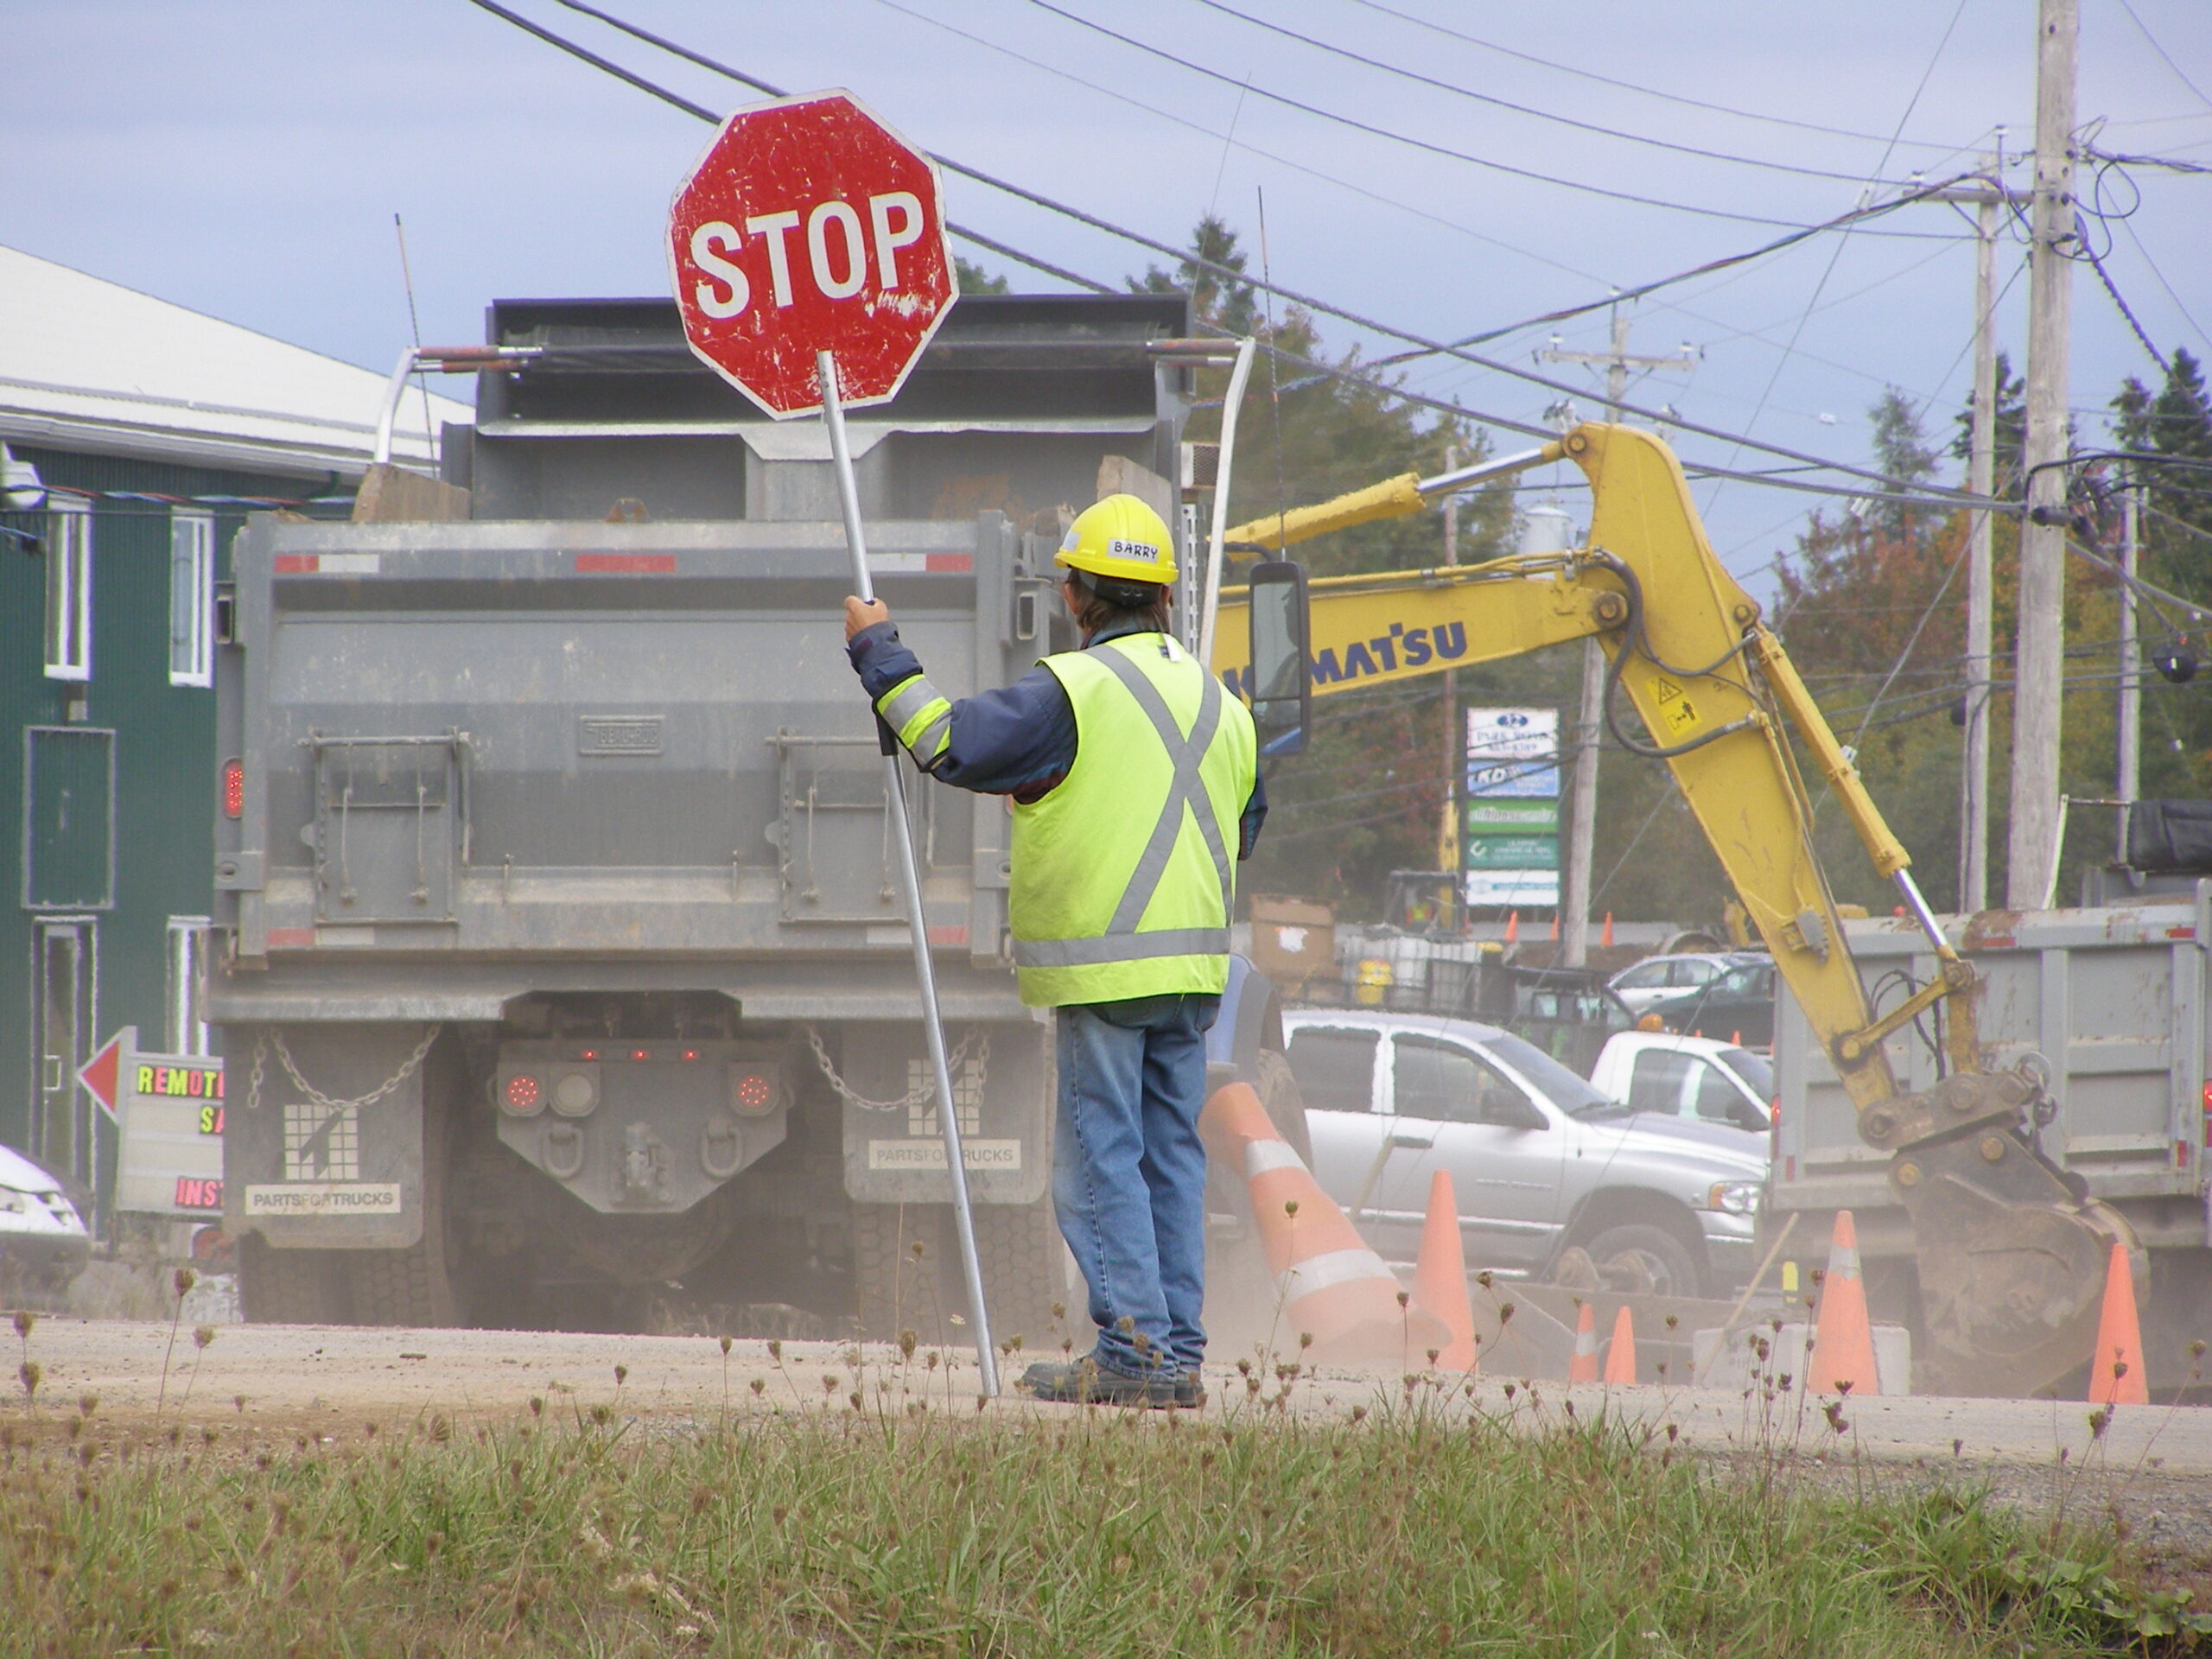 Construction flagger holds a stop sign while a dump truck passes in the background